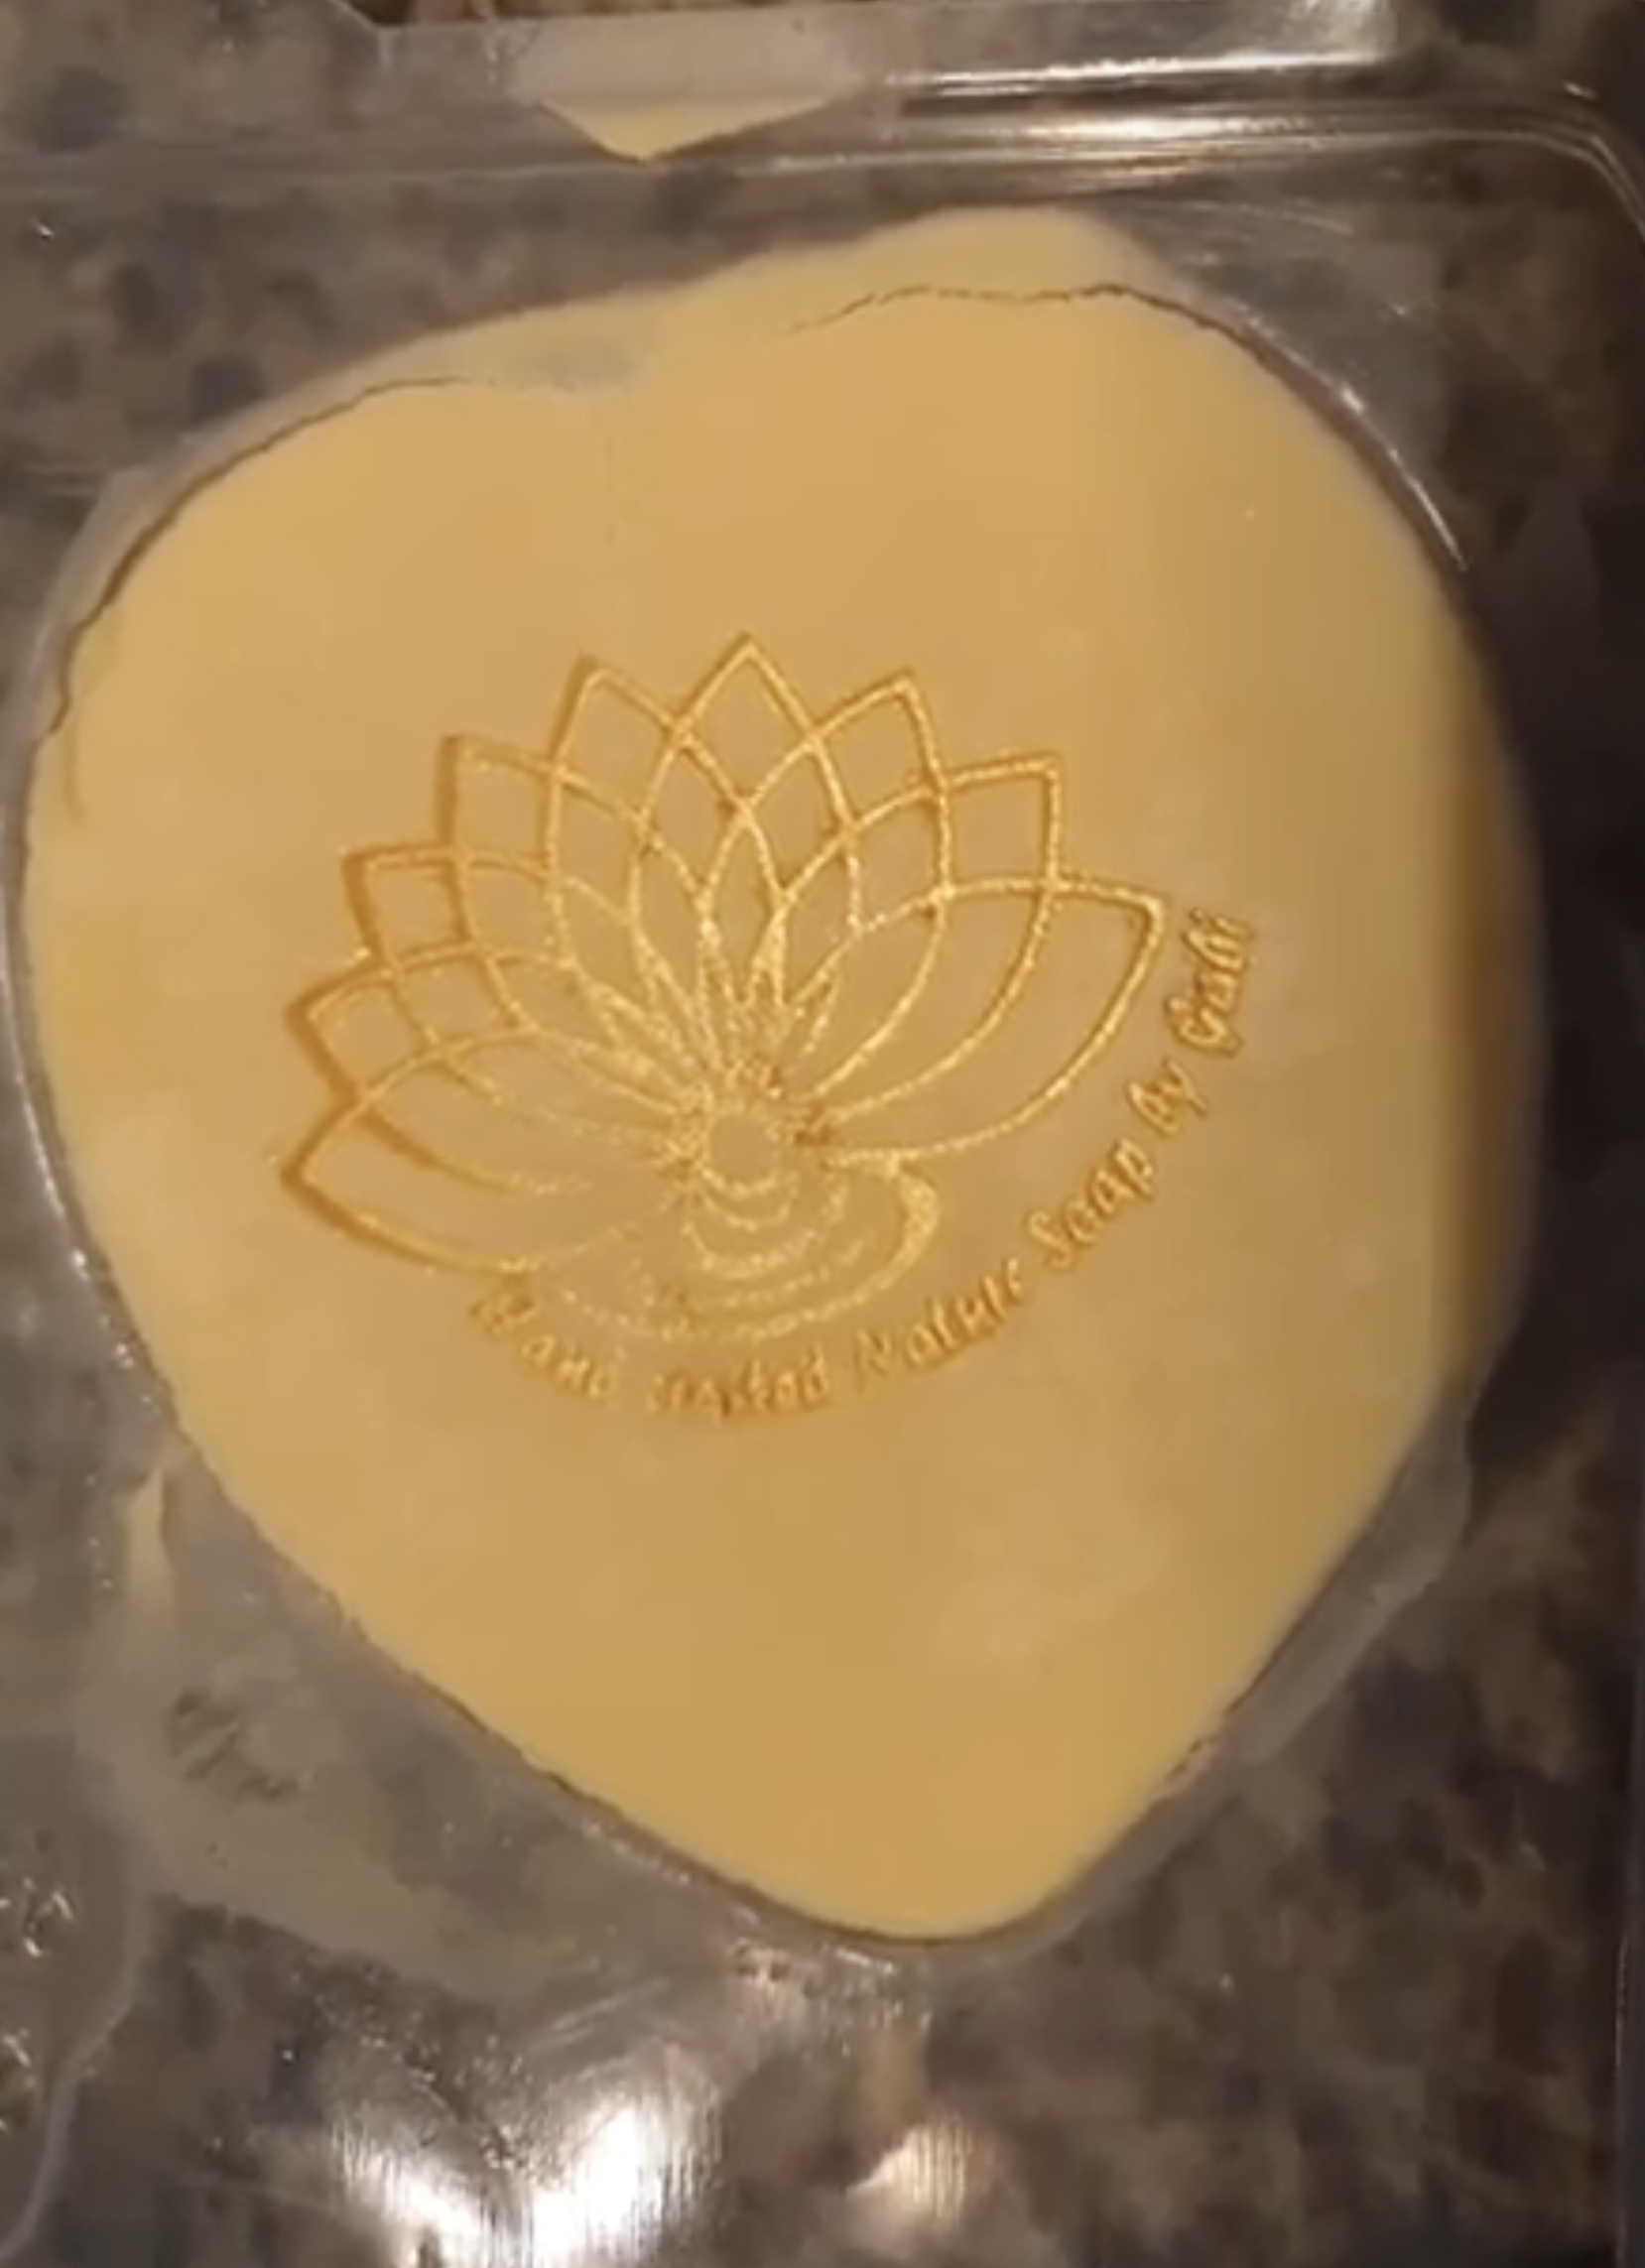 "hand crafted nature soap by Gabi"